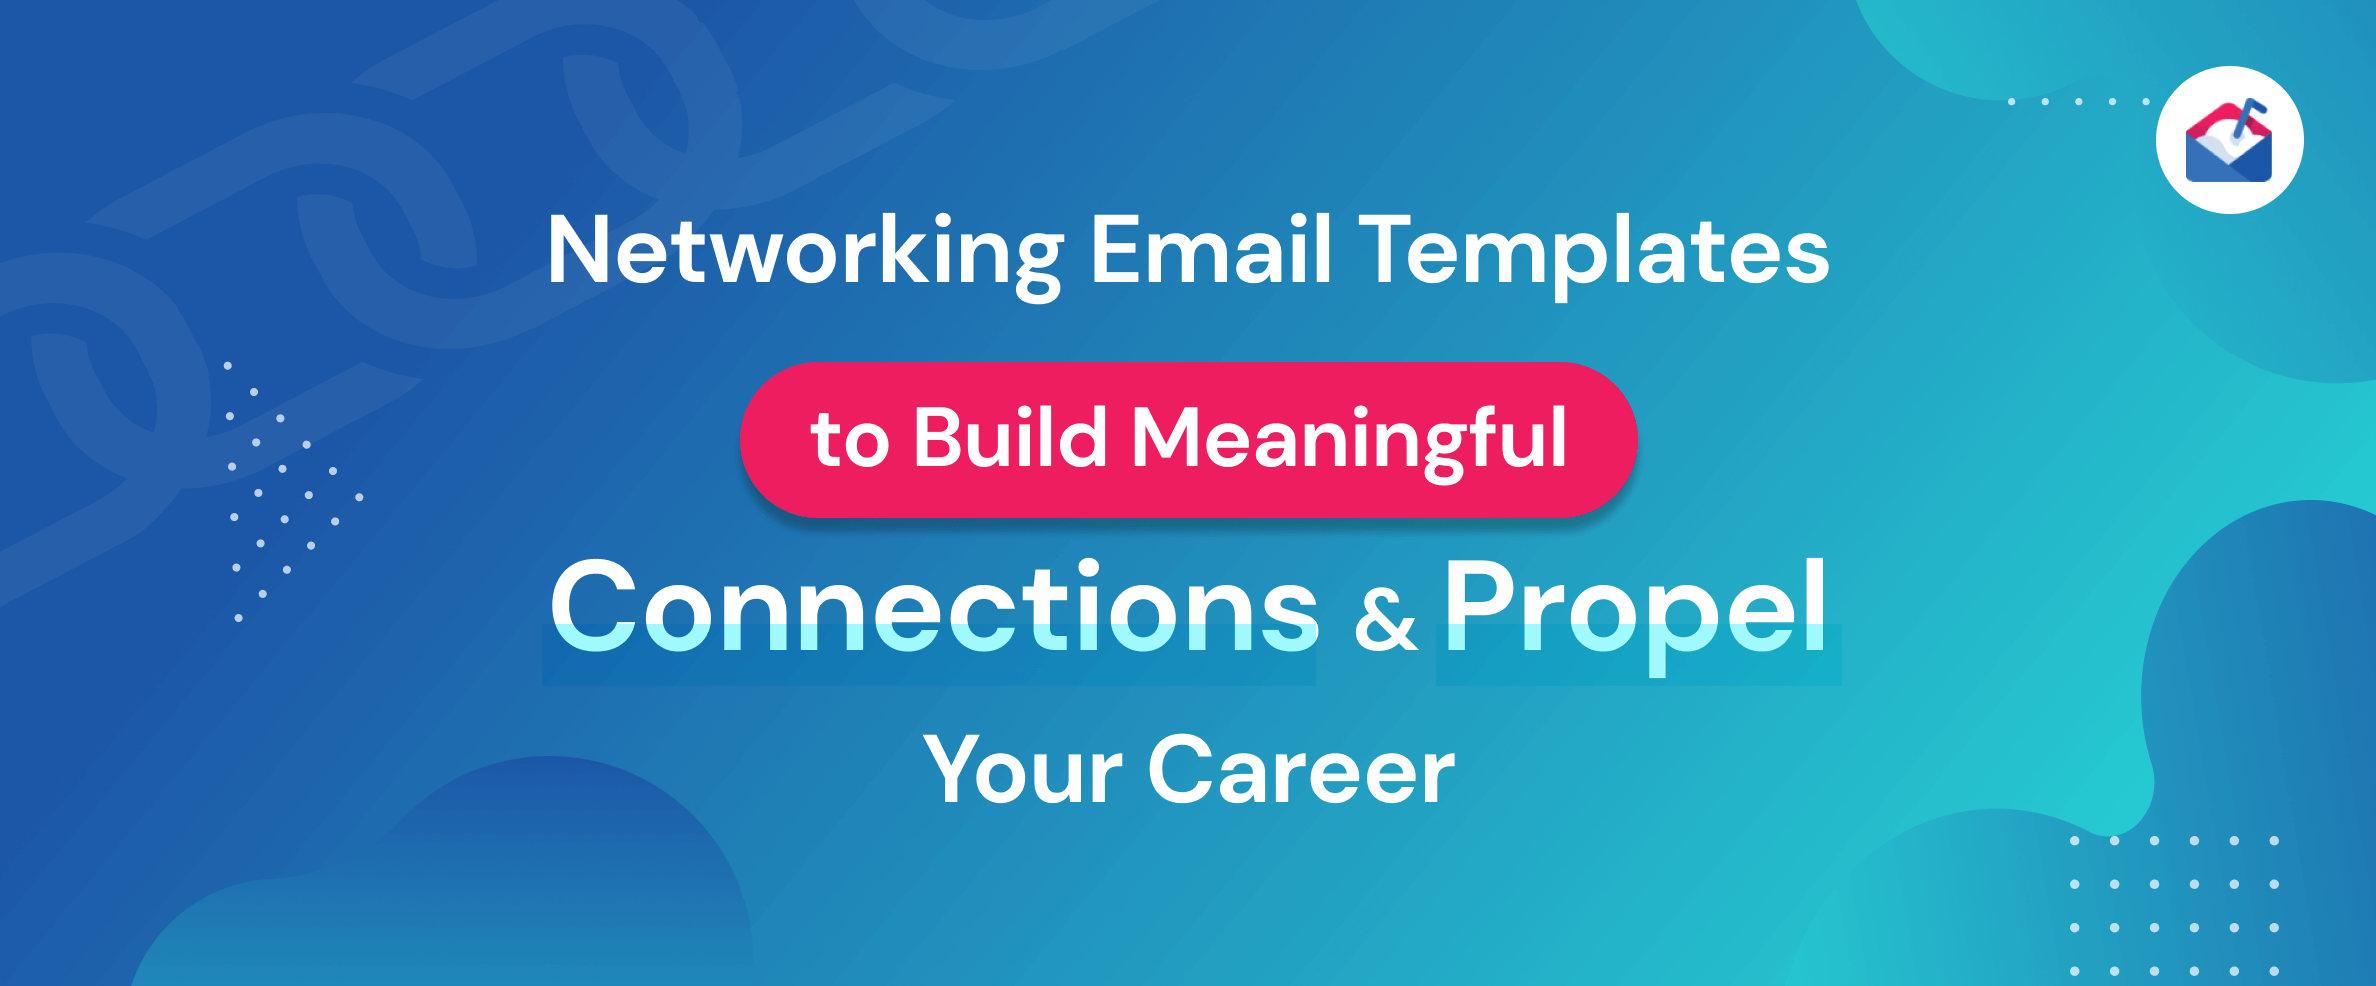 Networking Email Templates